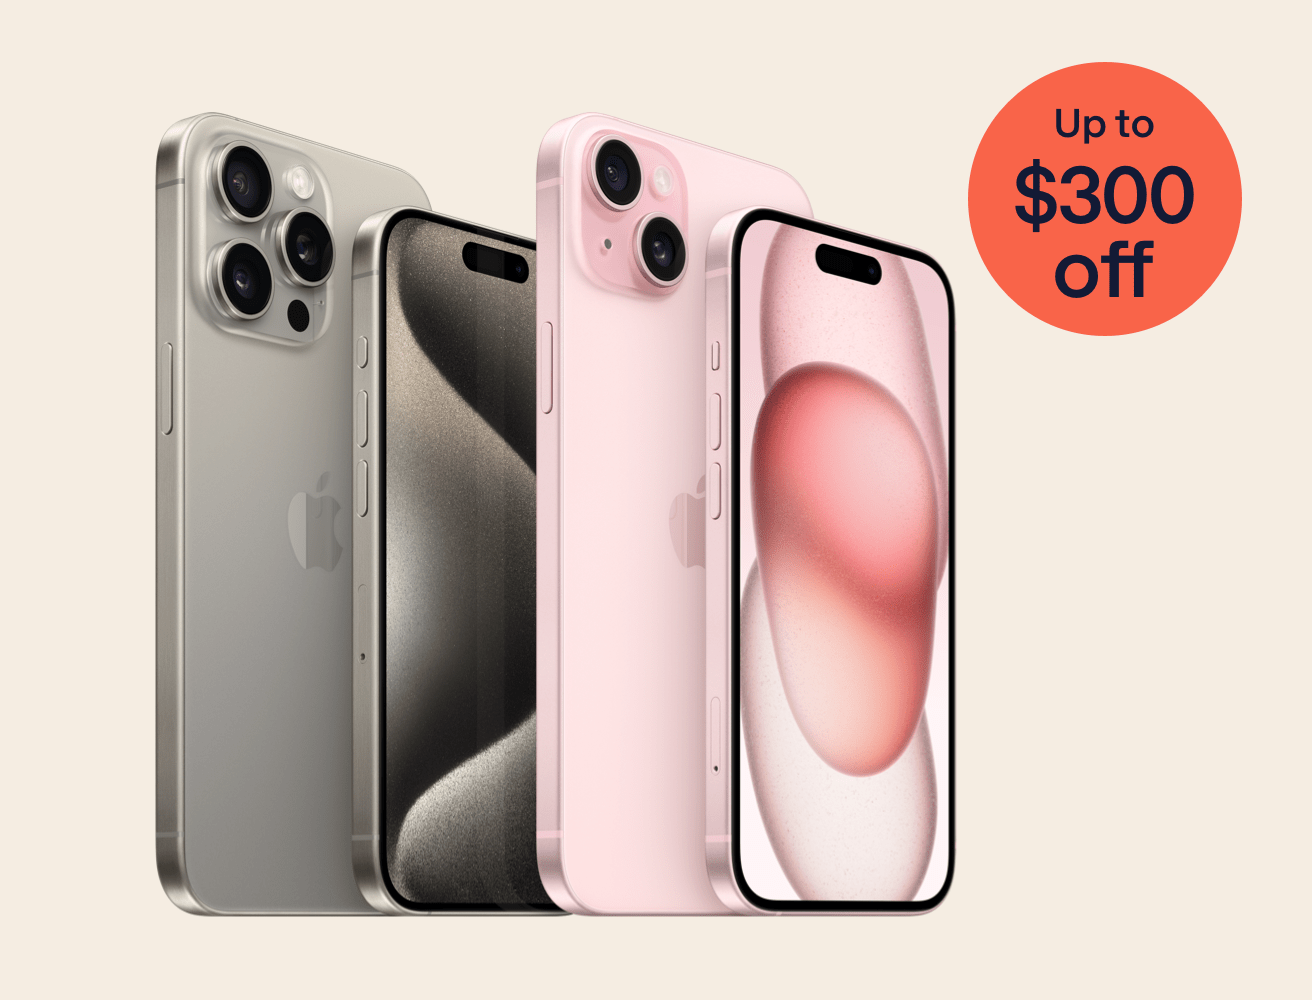 The iPhone 15 range including the Pro Max and Pro models in Natural Titanium colour, and Plus and iPhone 15 base model in Pink colour. An orange shape next to the phones indicates a discount on the range. Text in orange shape: Up to $300 off.